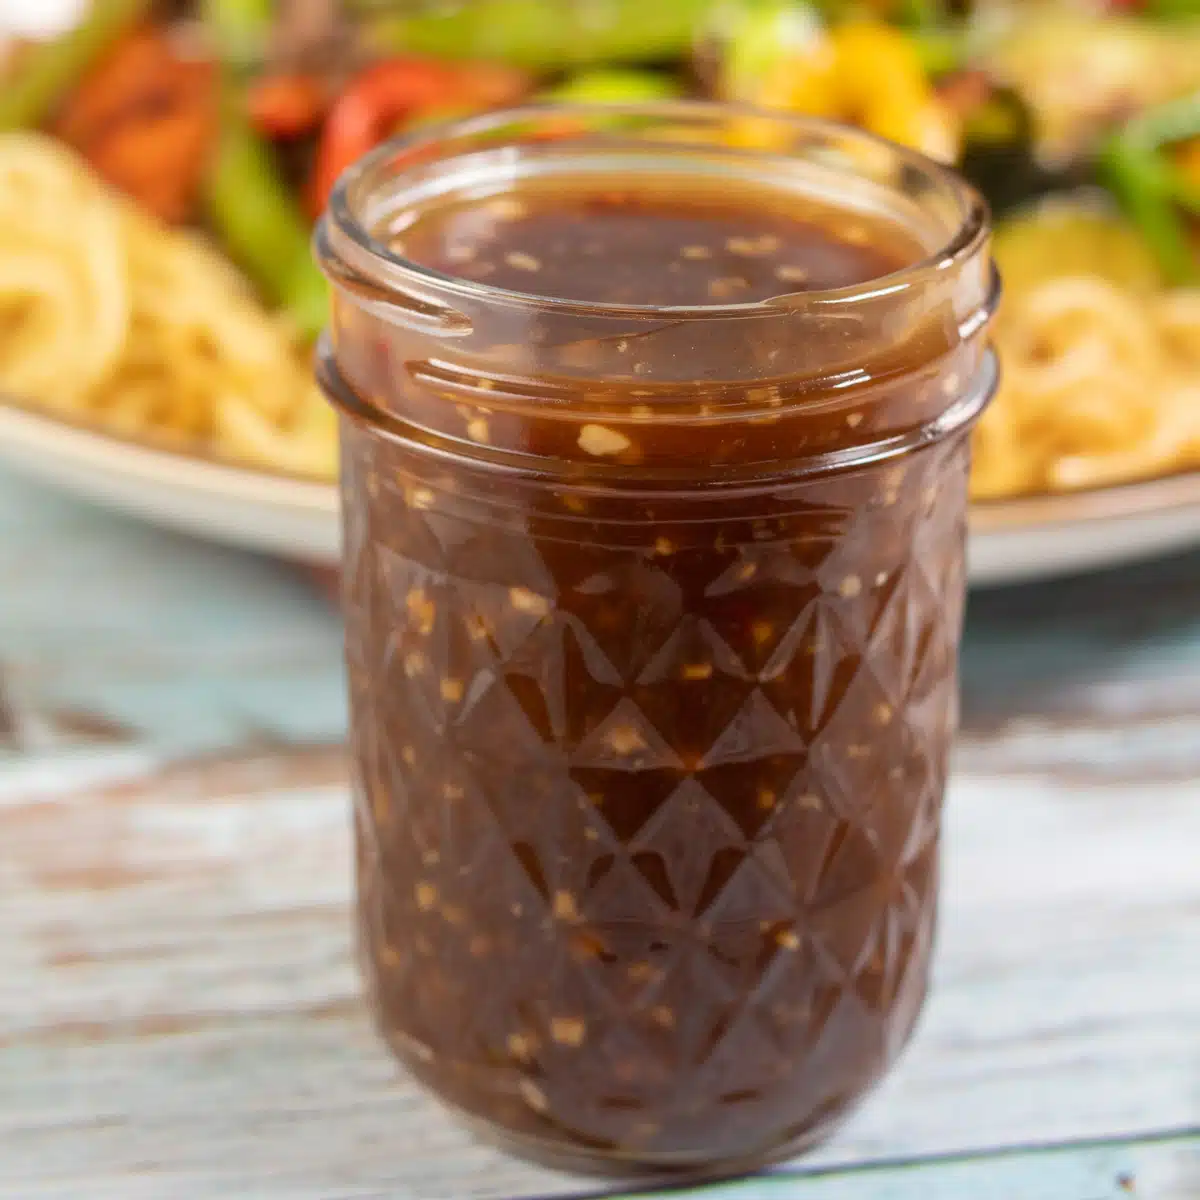 Square image showing a glass jar of stir fry sauce.